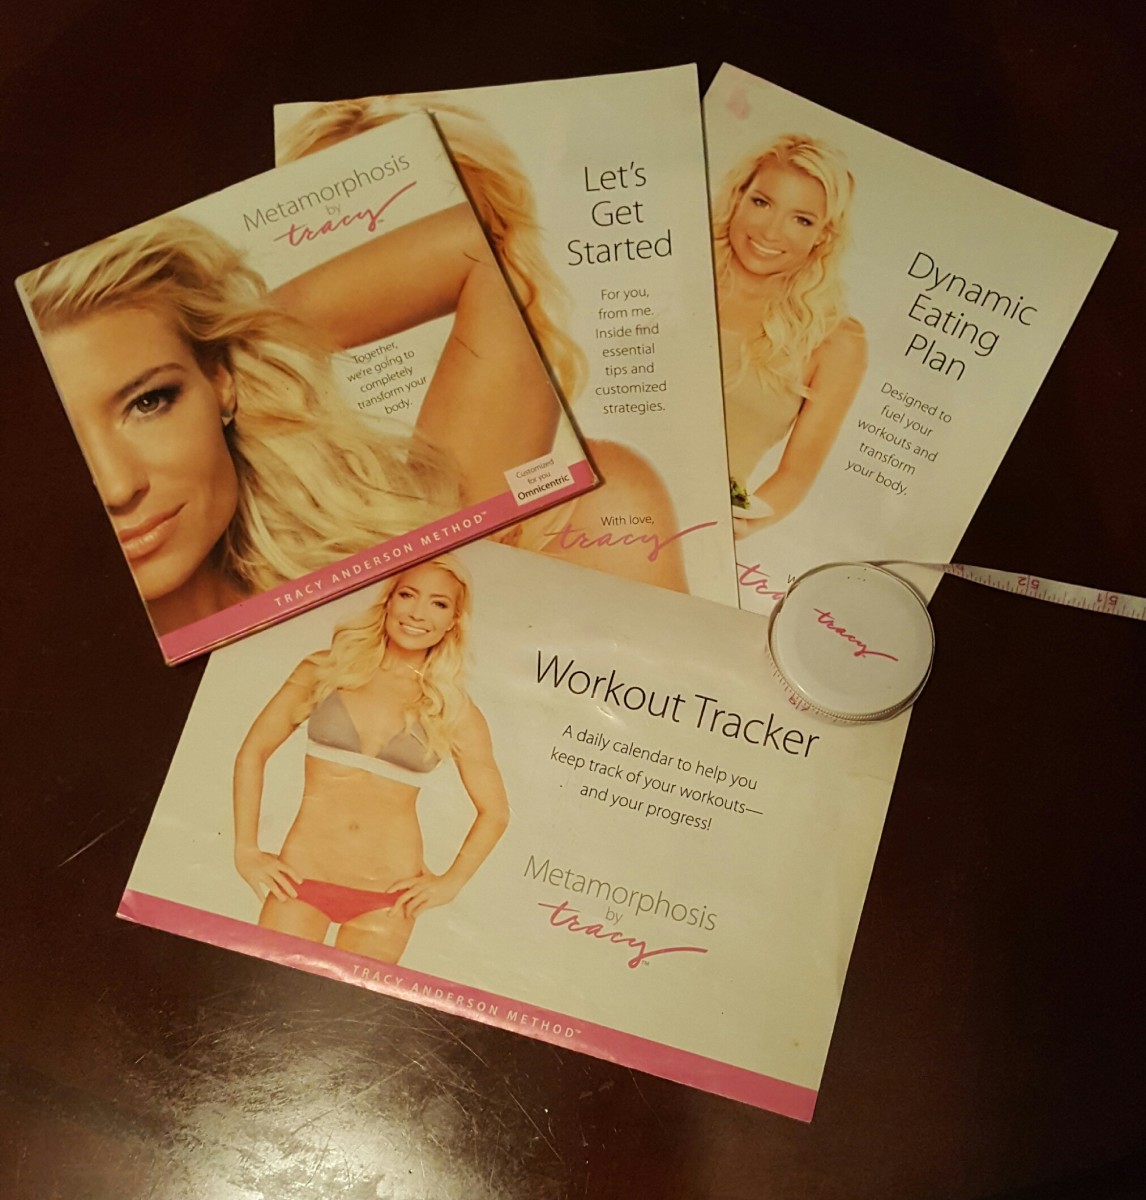 Tracy Anderson Weight Loss Chart